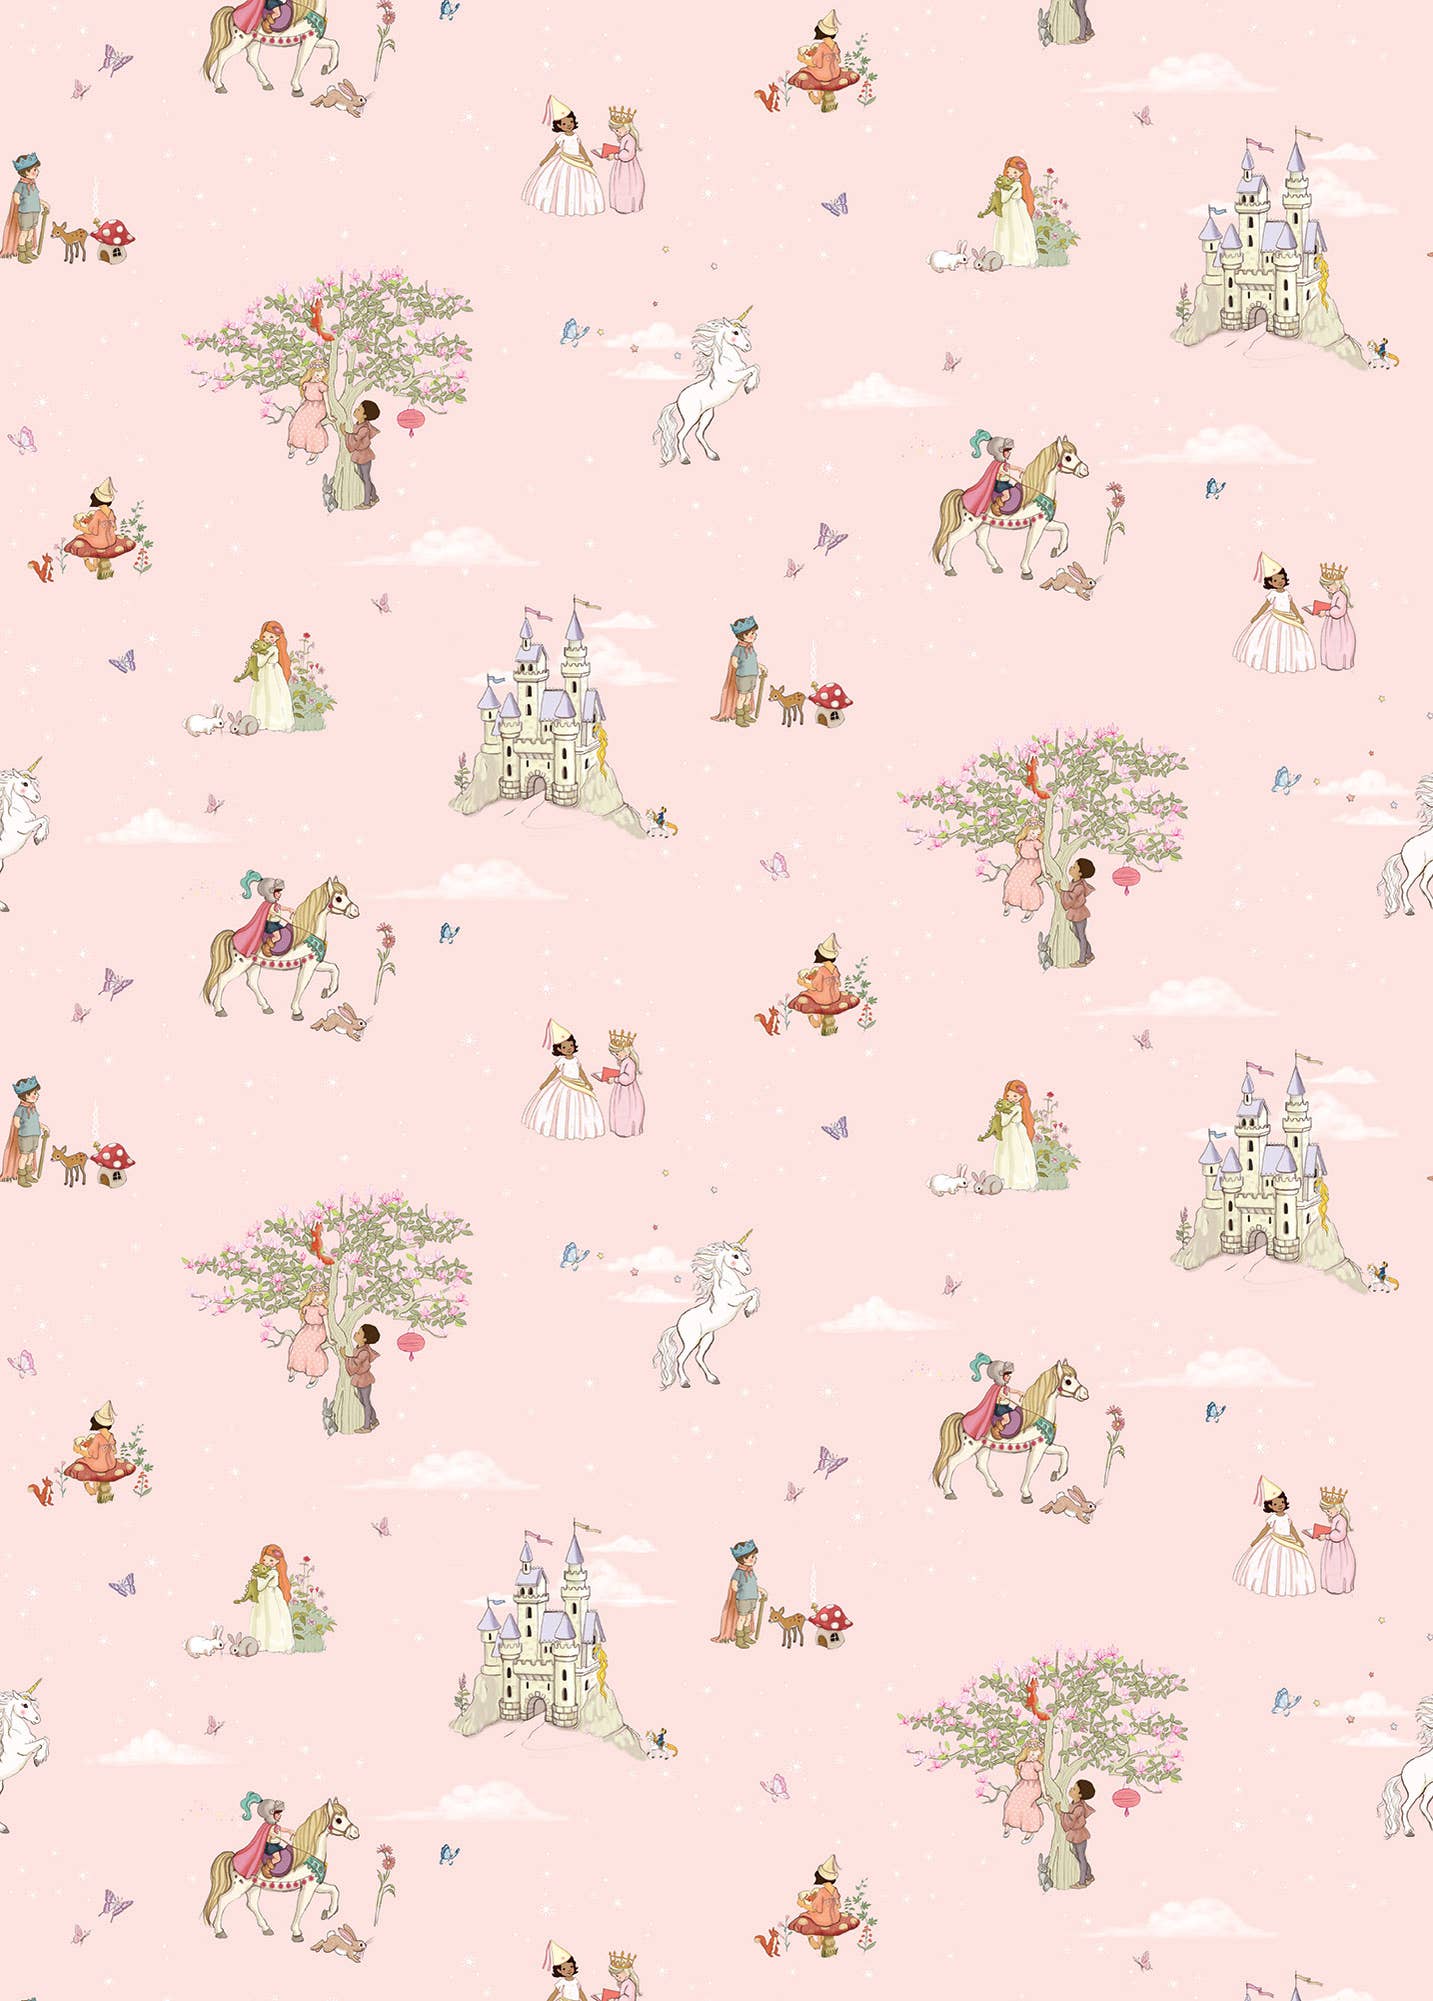 Belle & Boo wrapping paper sheet - Fairytale Kingdom